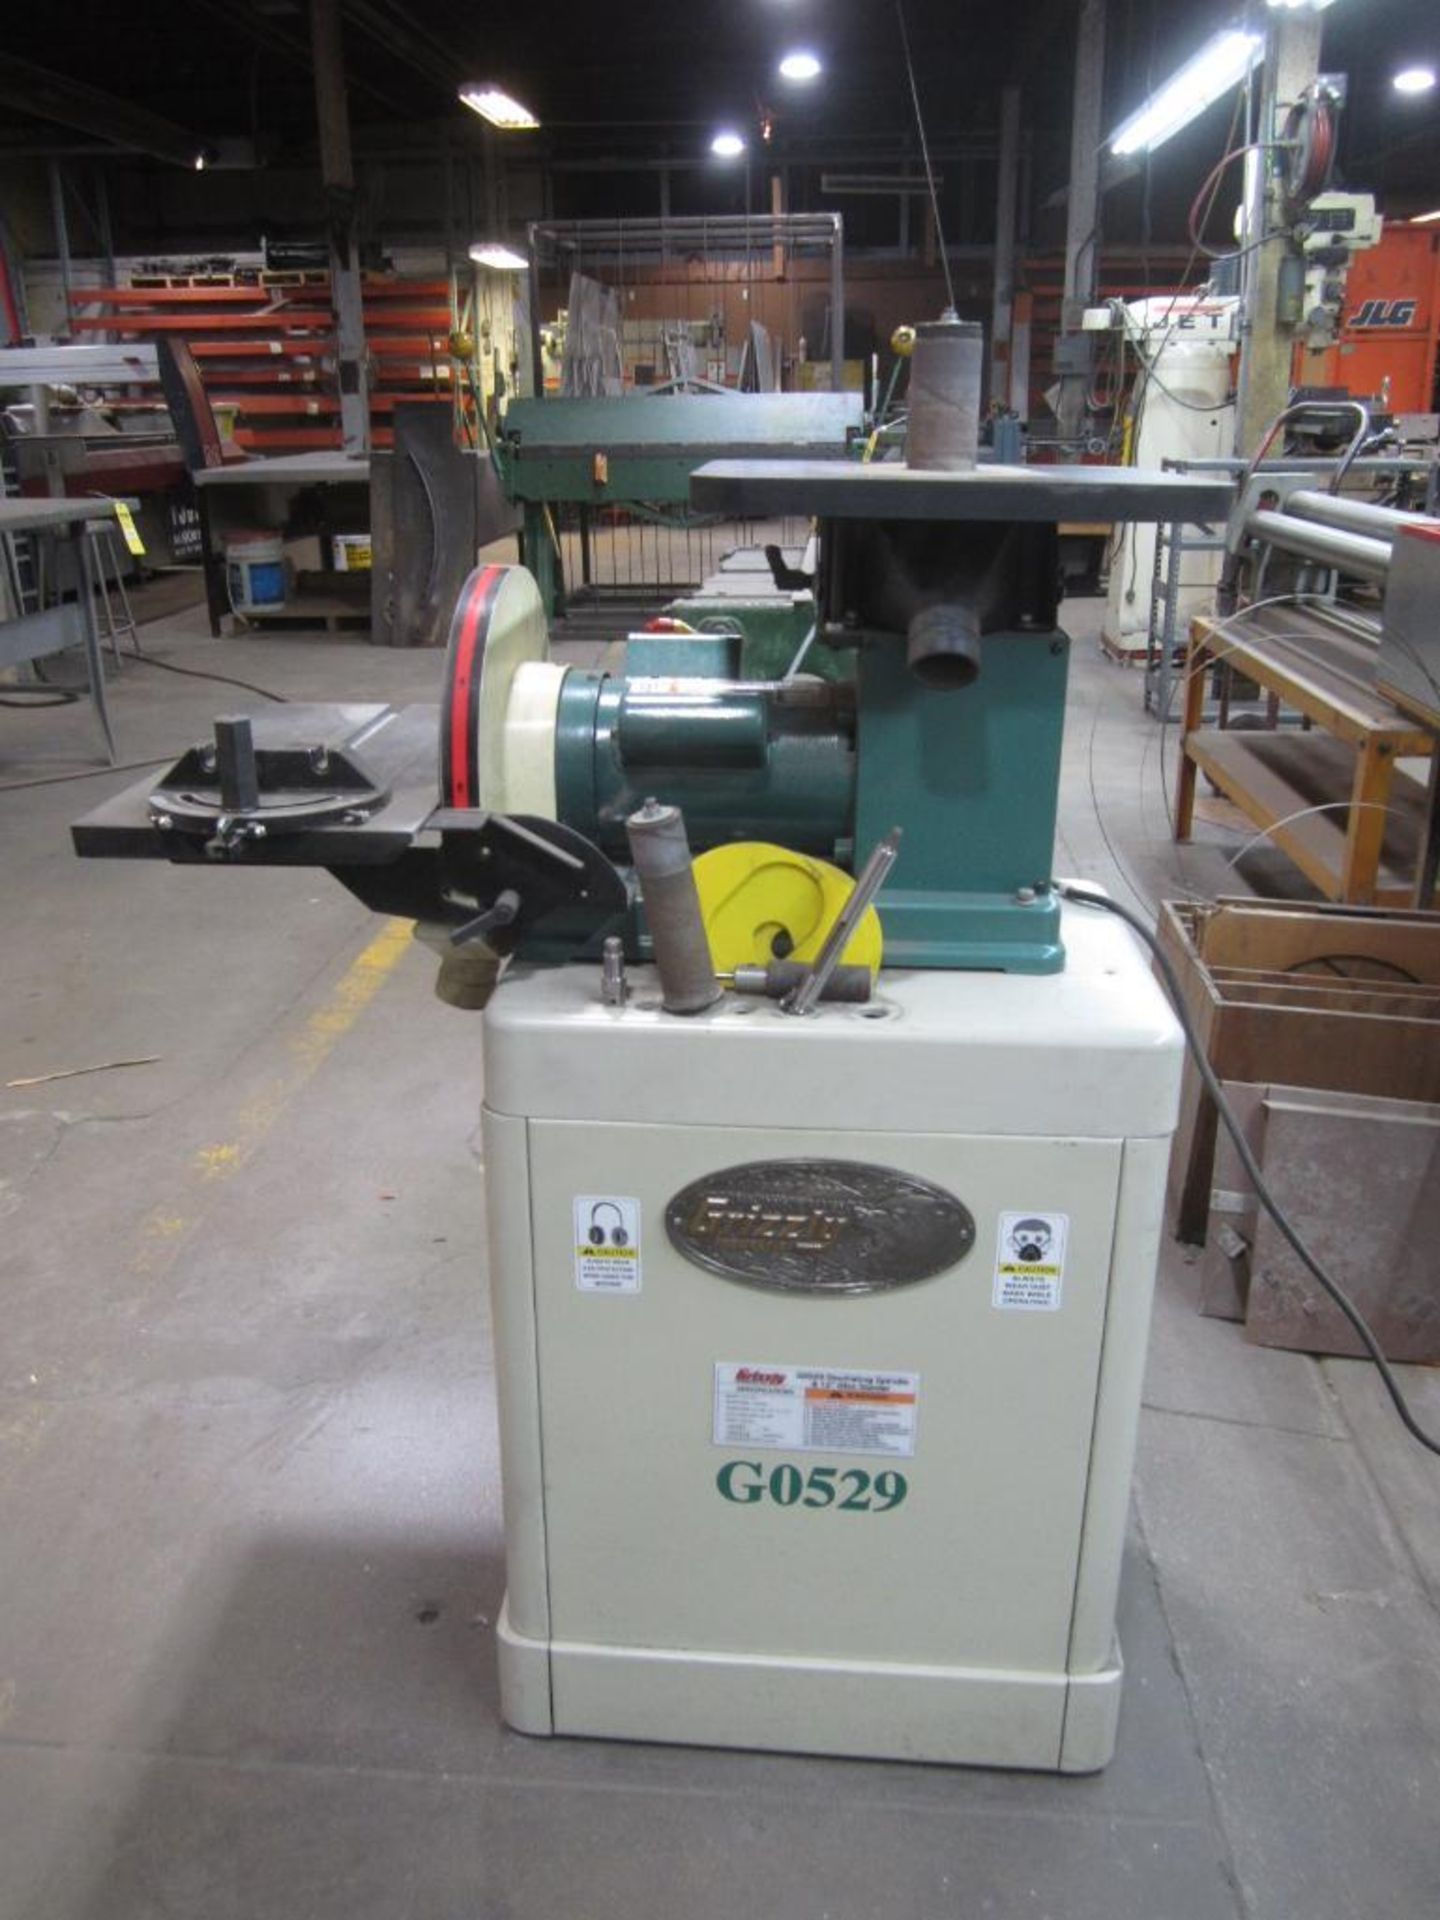 Grizzly Industrial G0529 Oscillating Spindle & 12" Disc Sander